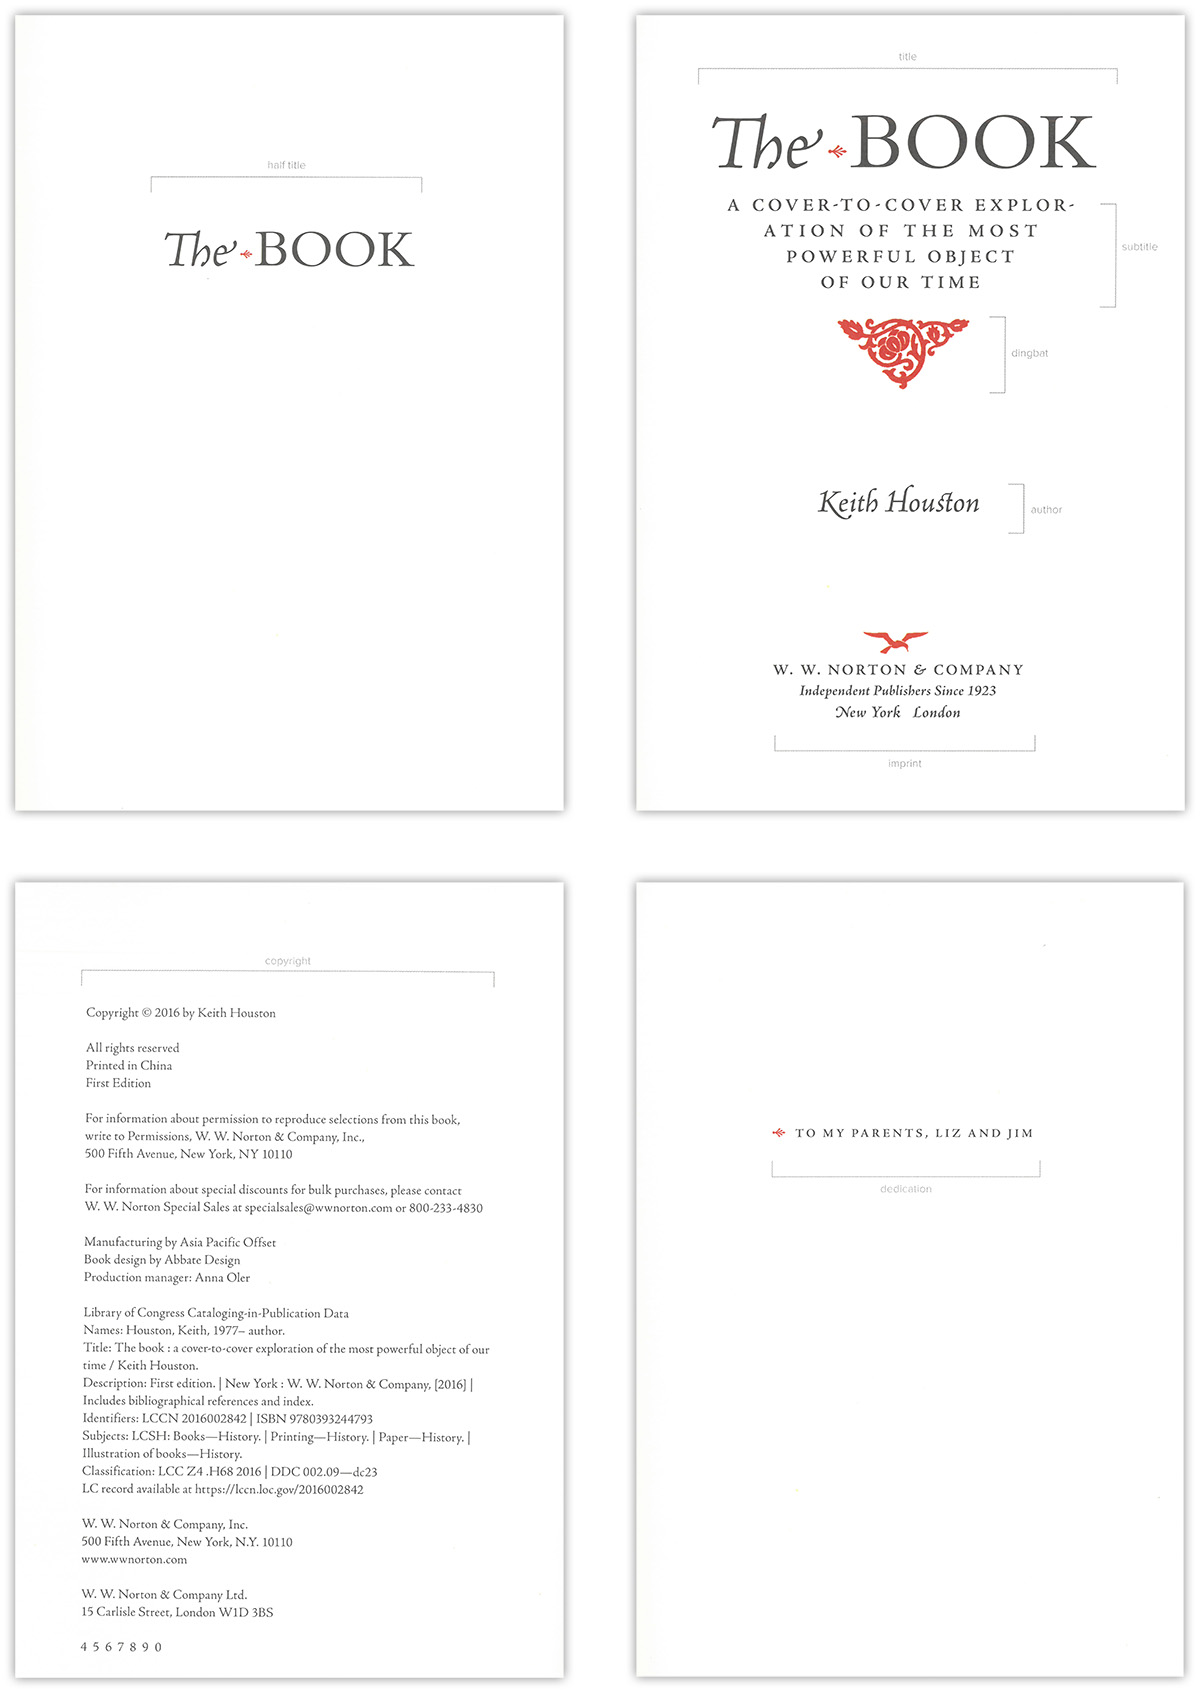 Four screenshot captures of The Book's half-title and title pages, as well as the copyright and dedication pages.